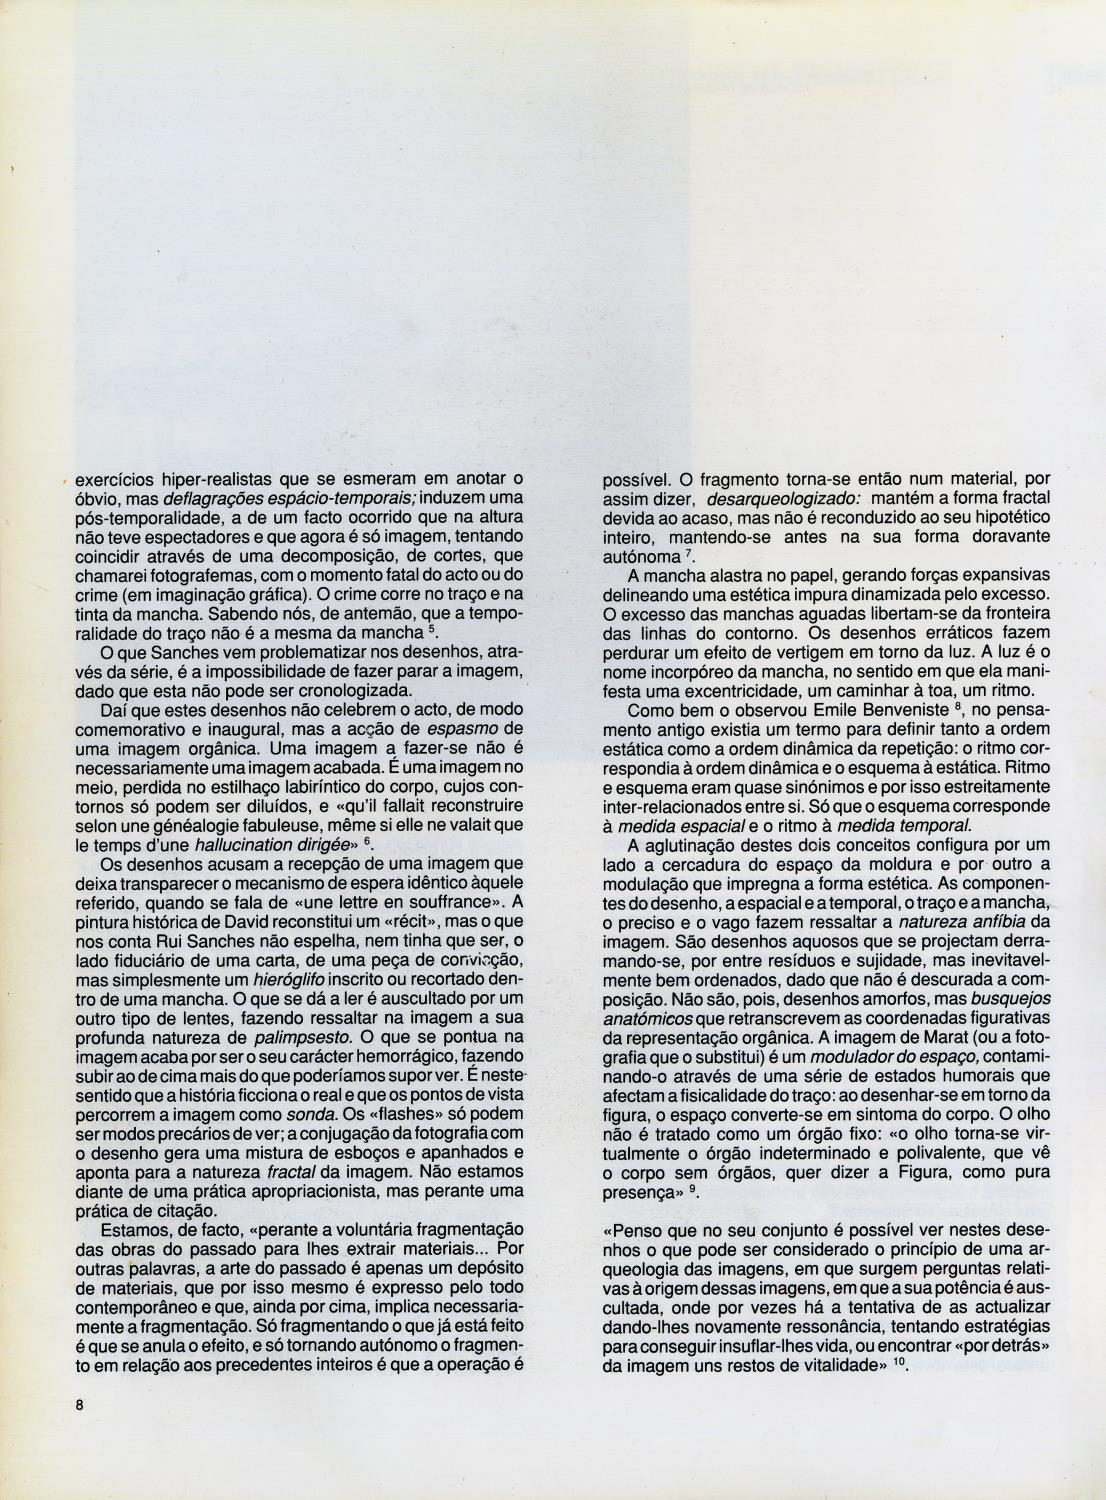 1992_PACL30a_92_p.8